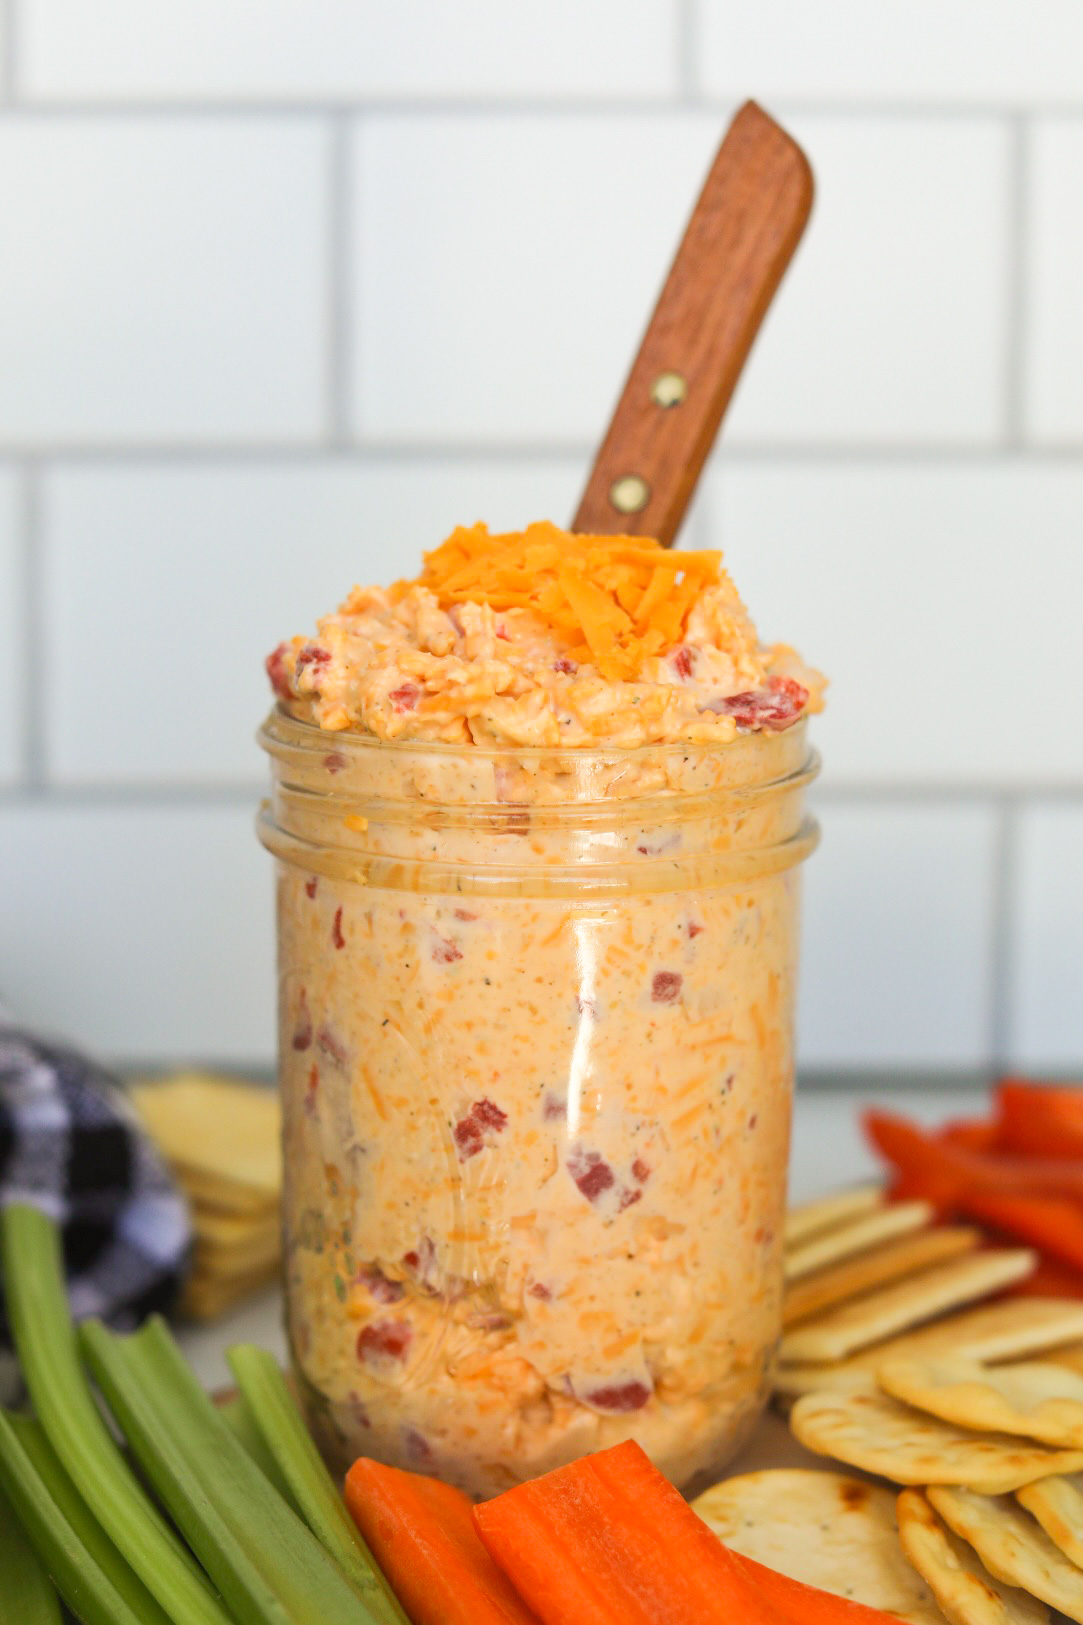 Old Fashioned Pimento Cheese in a small clear glass mason jar with extra shredded cheese added on top. Sliced celery, carrots and crackers and a brown knife added for styling purposes.